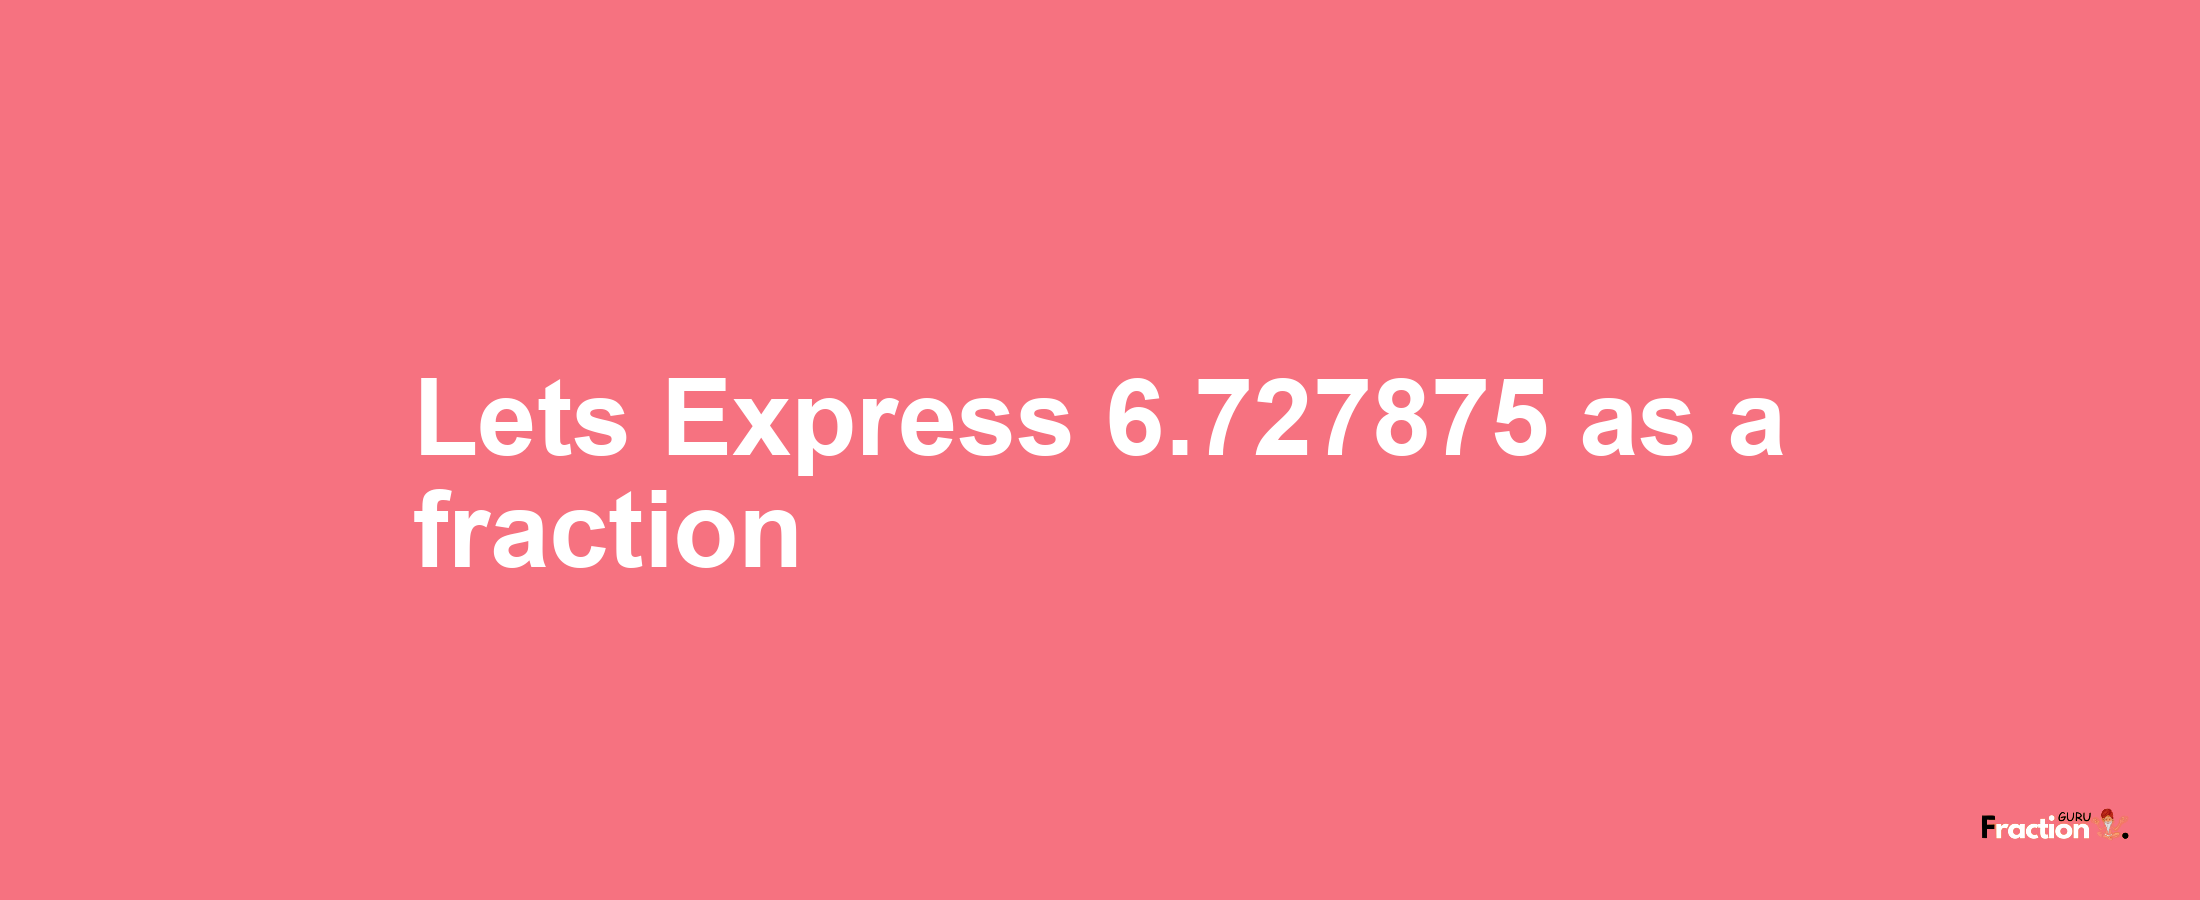 Lets Express 6.727875 as afraction